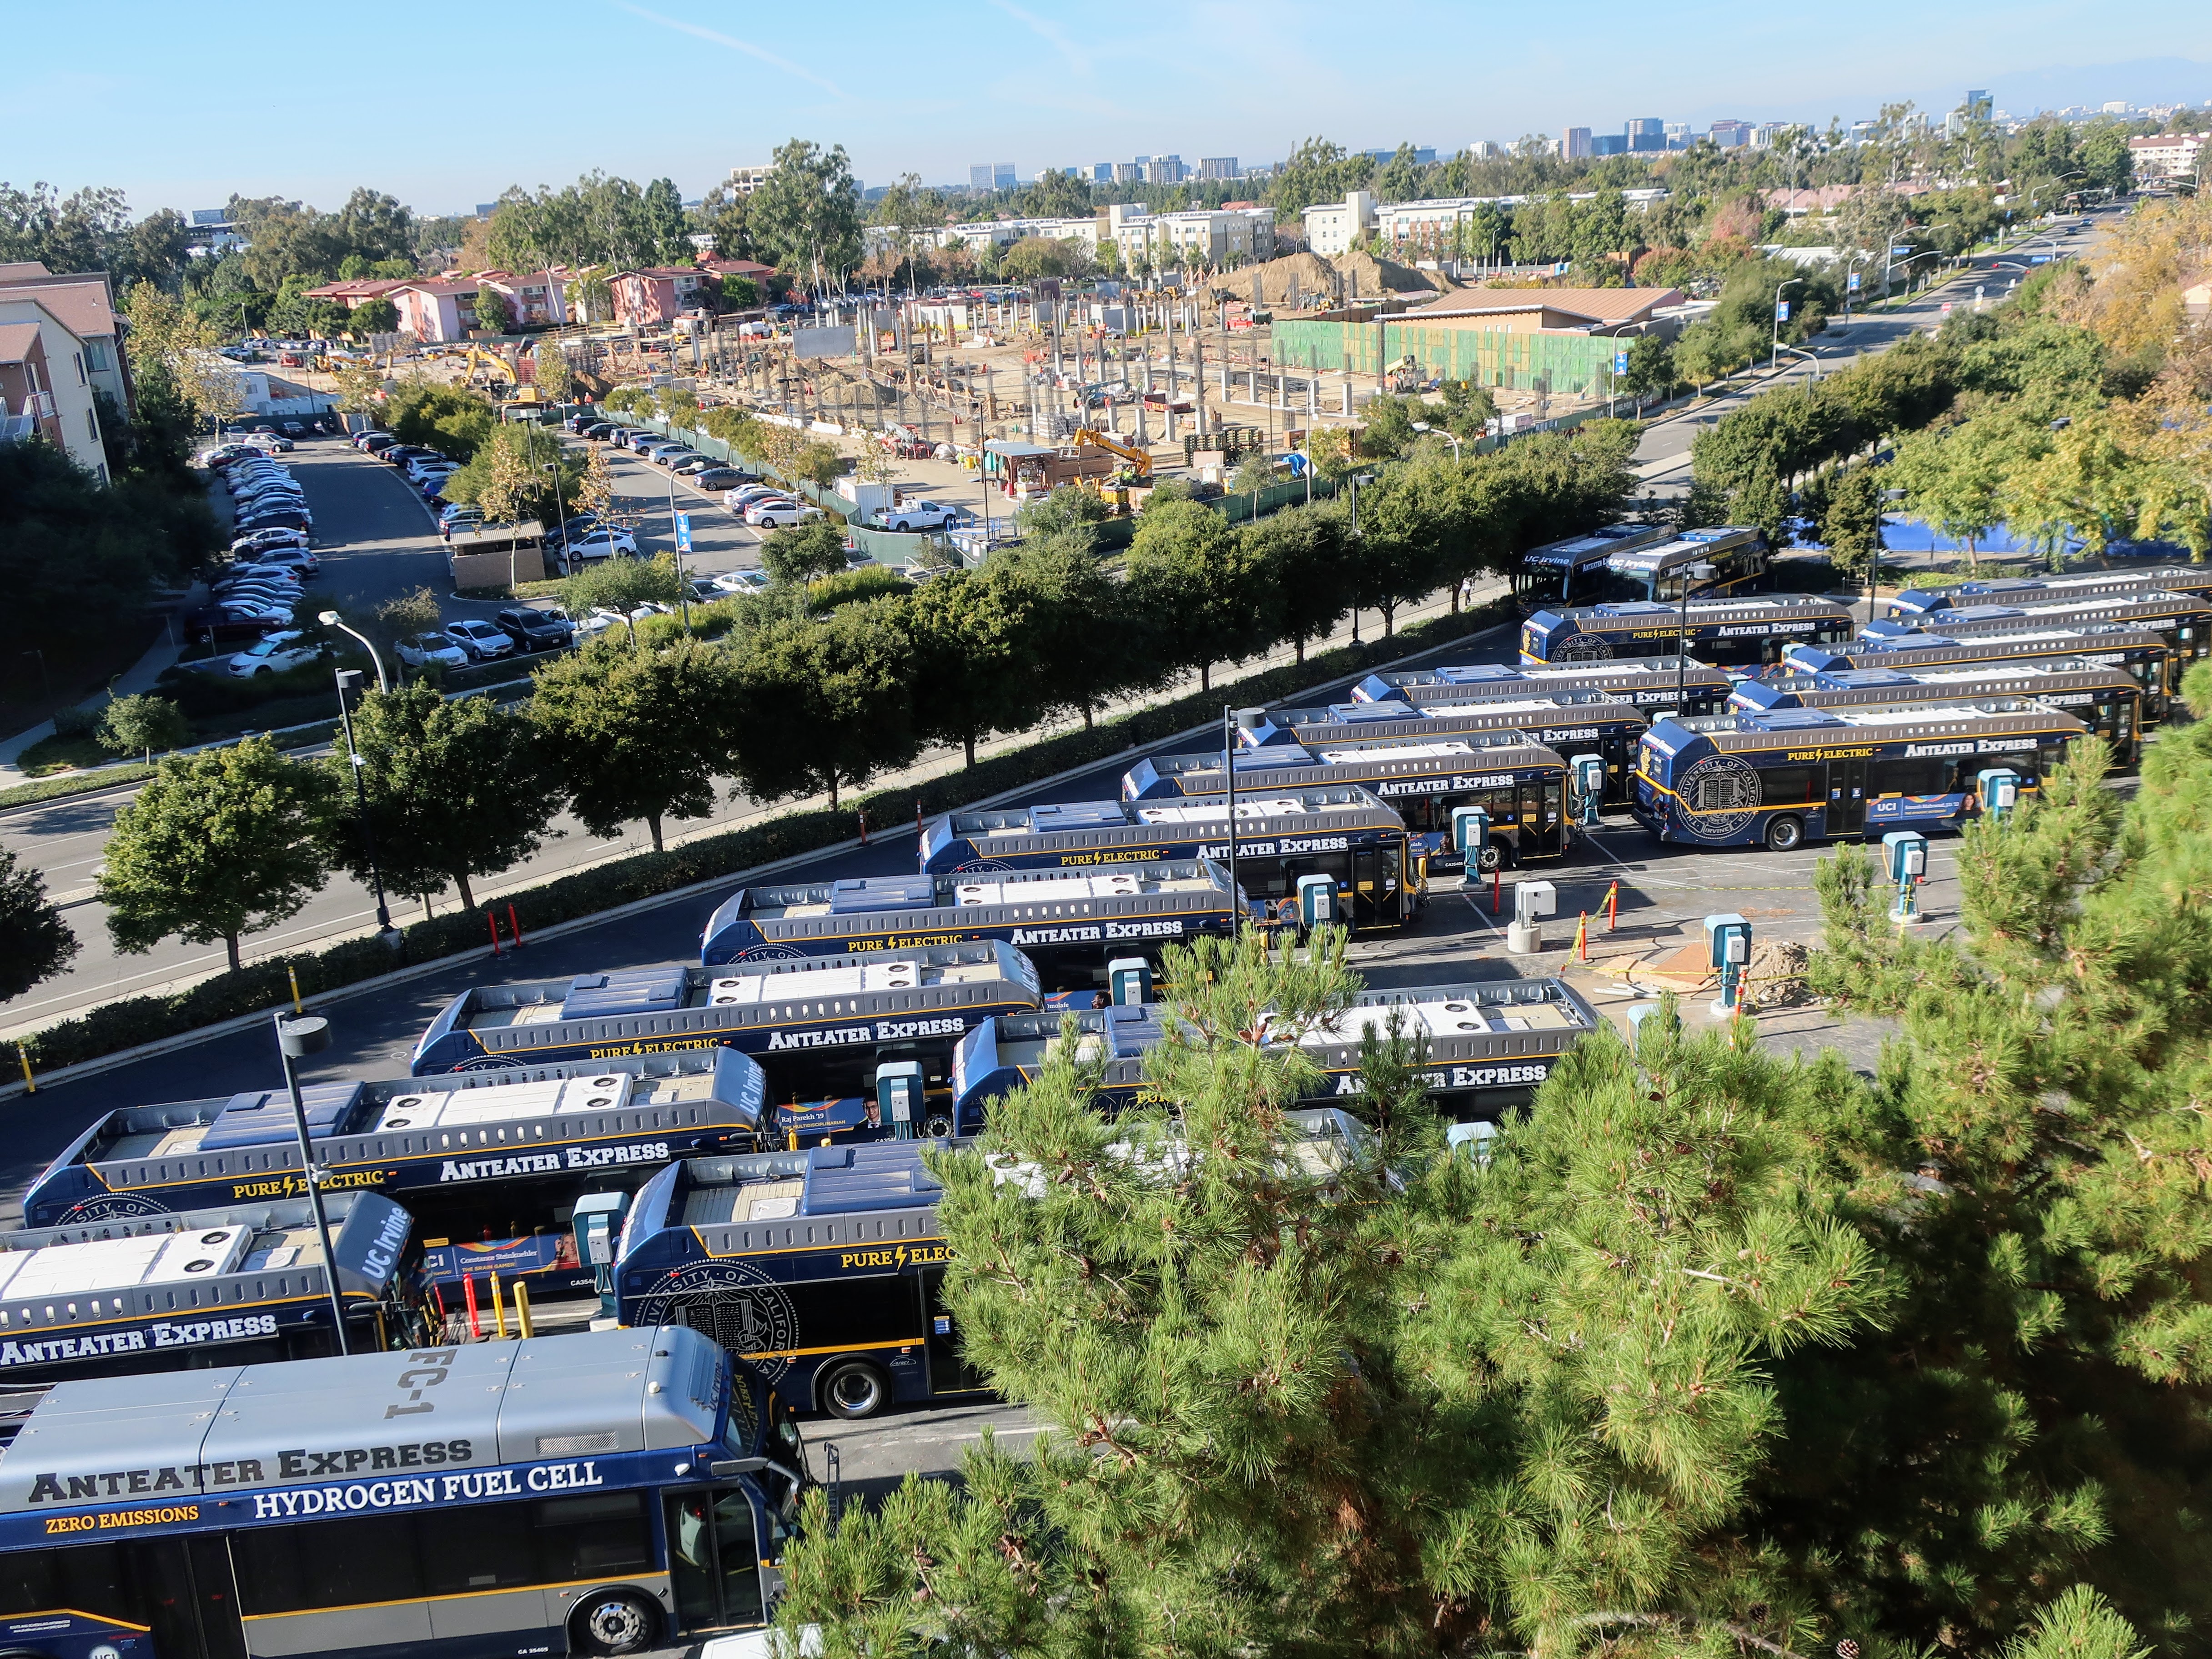 A view of Anteater Express buses at Lot 36.